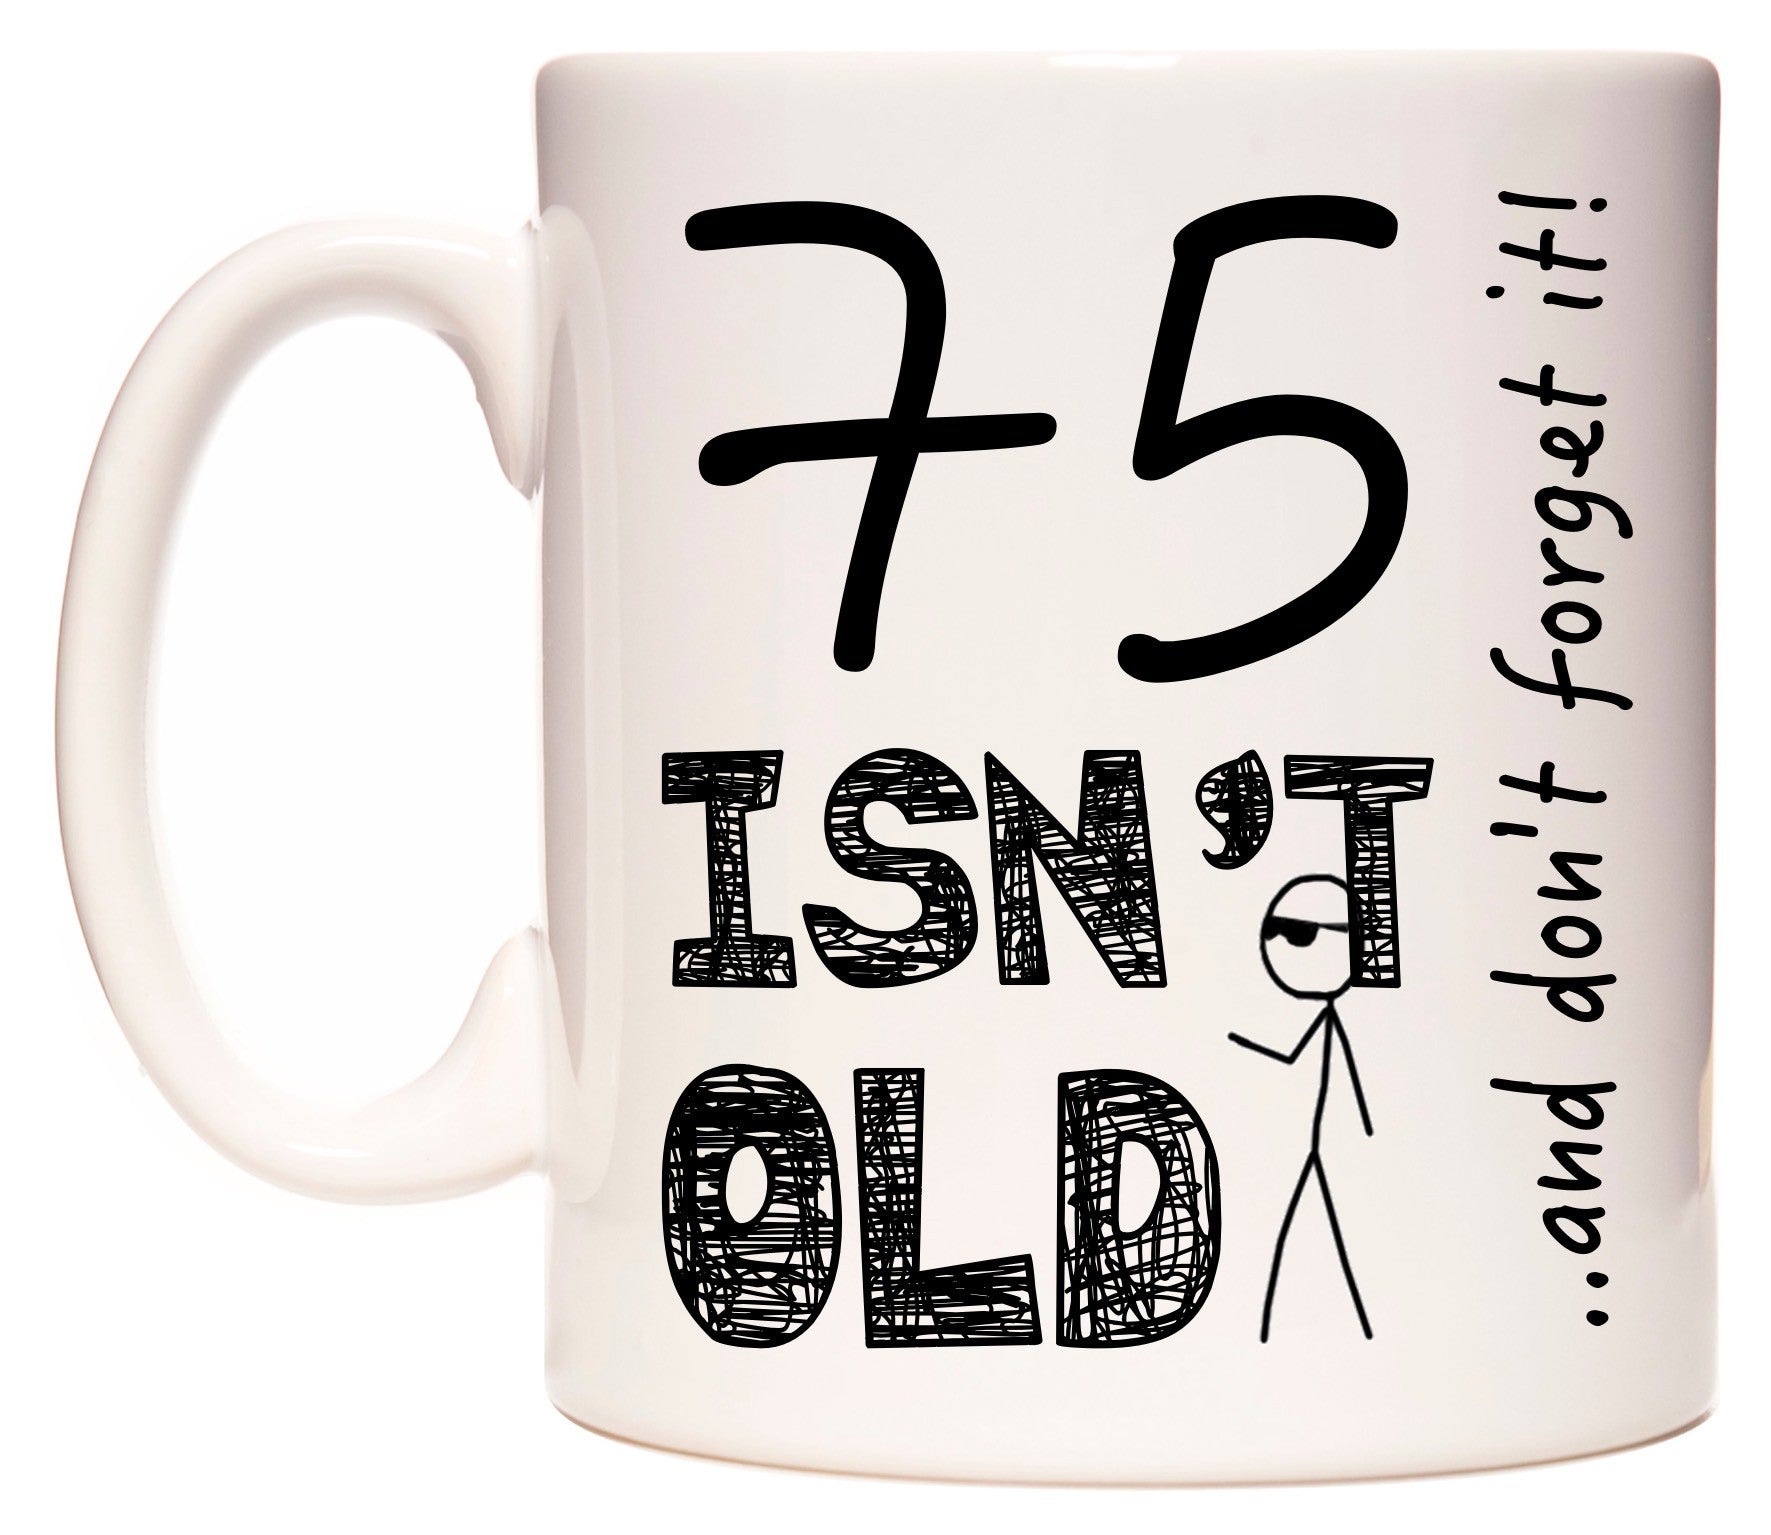 This mug features 75 Isn't Old